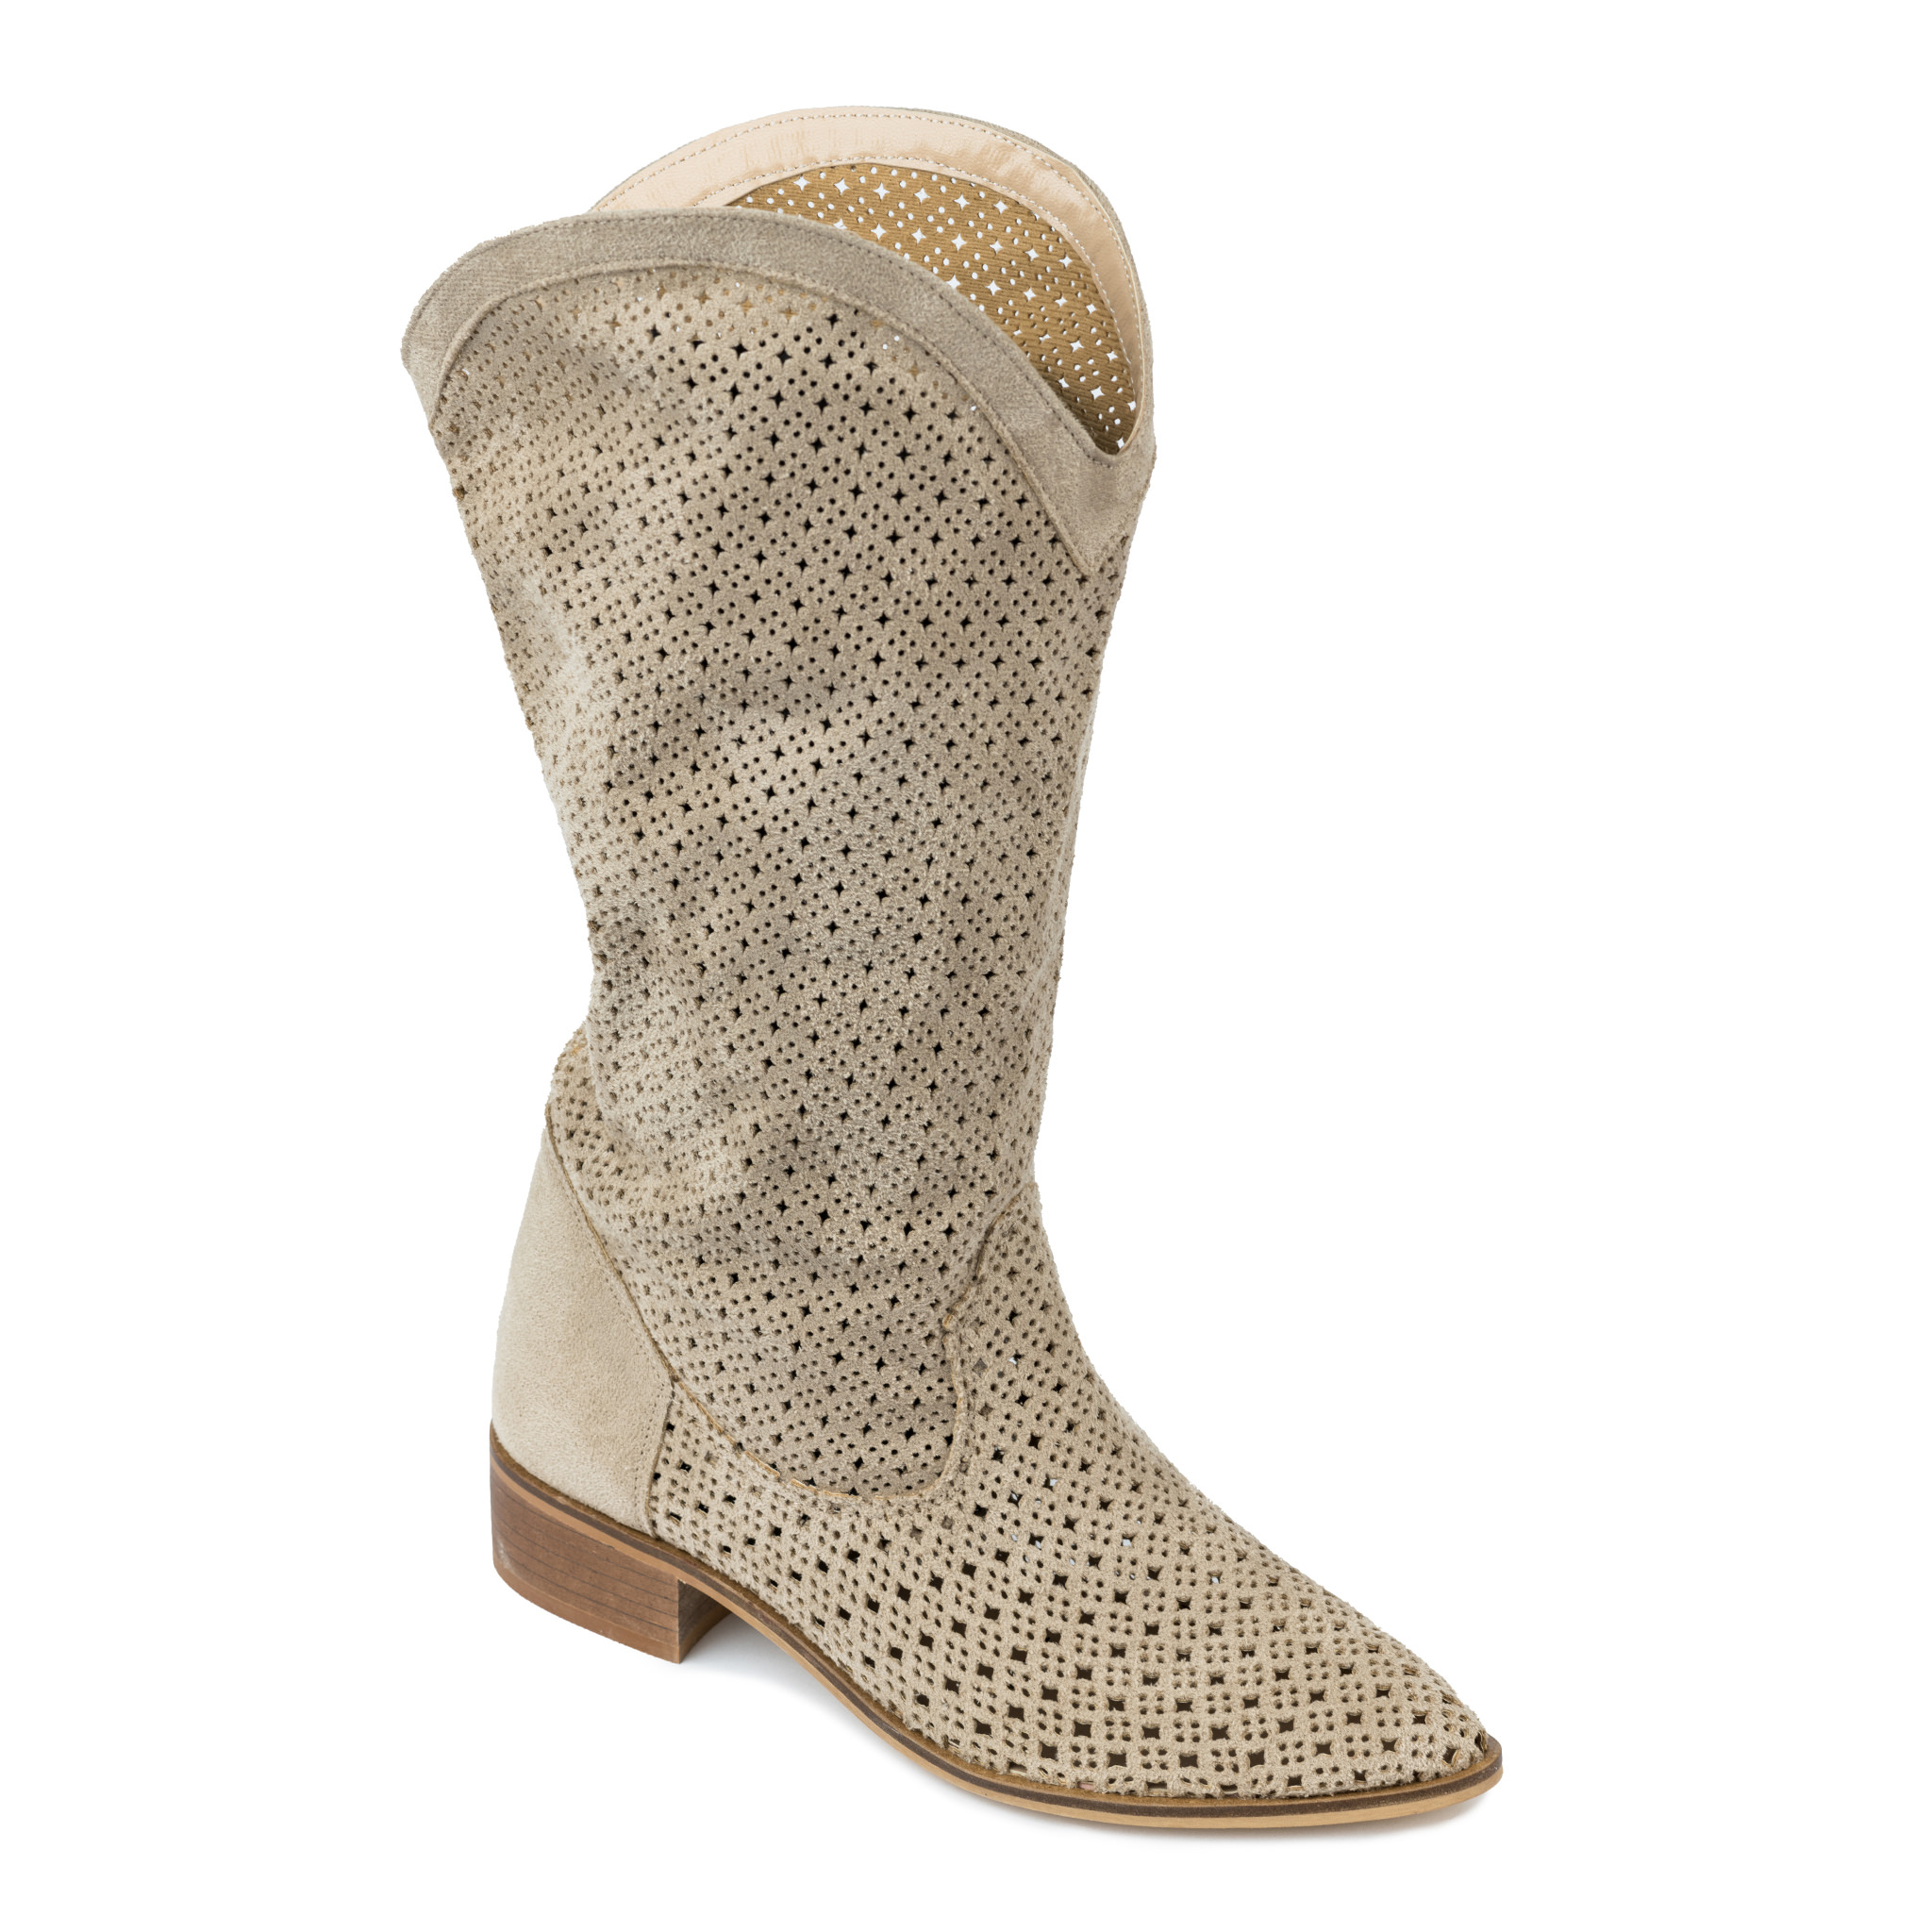 VELOUR HOLLOW PULL ON BOOTS - BEIGE